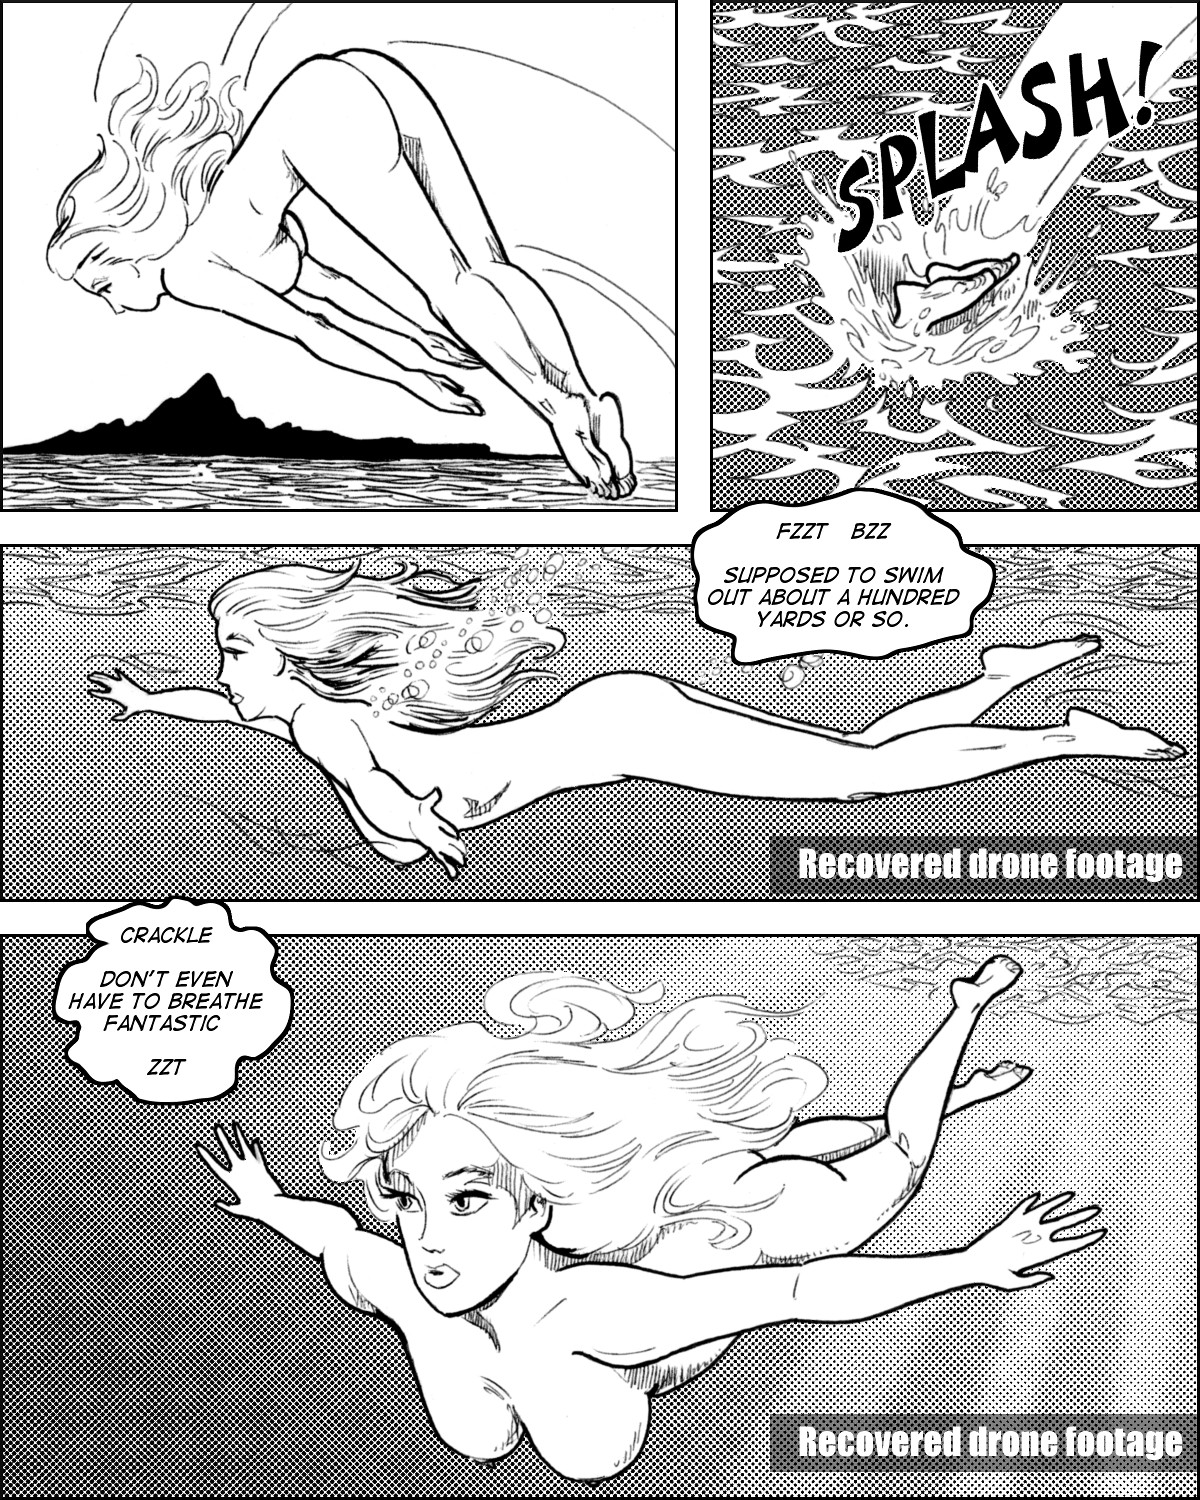 Eliza dives and swims naked through the ocean.